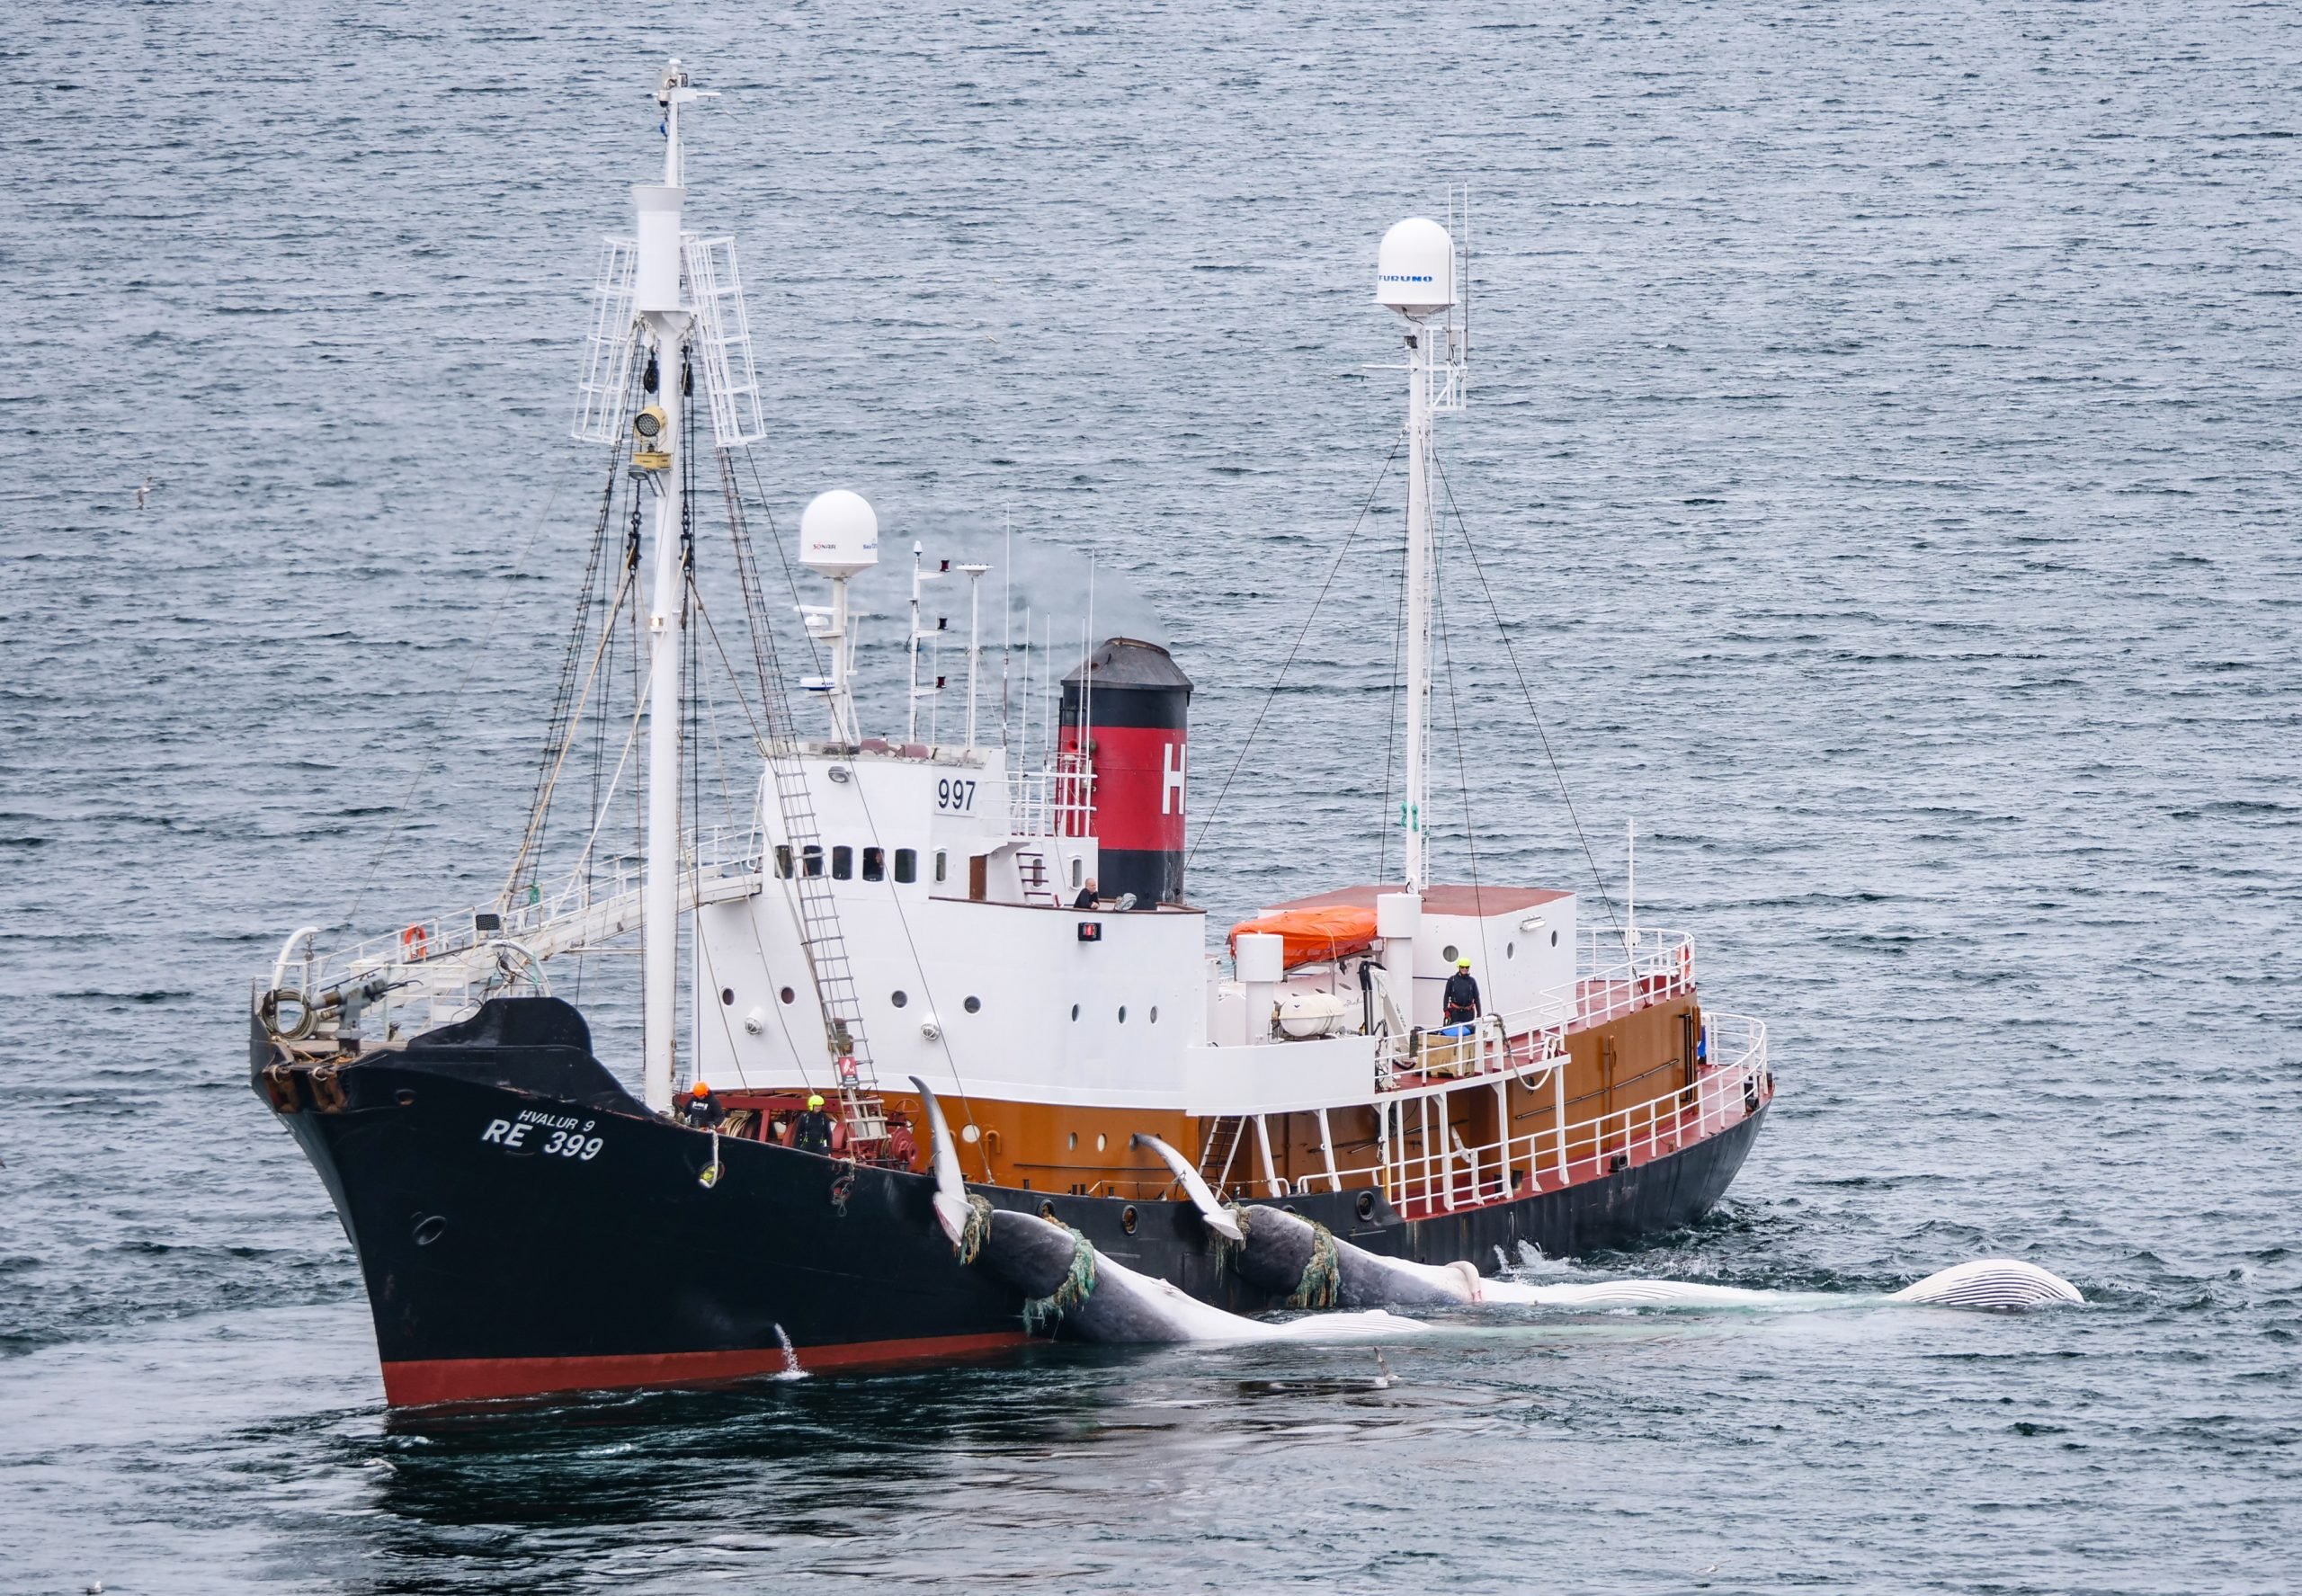 Whaling ship Hvalur 9 returning to the port with two dead fin whales